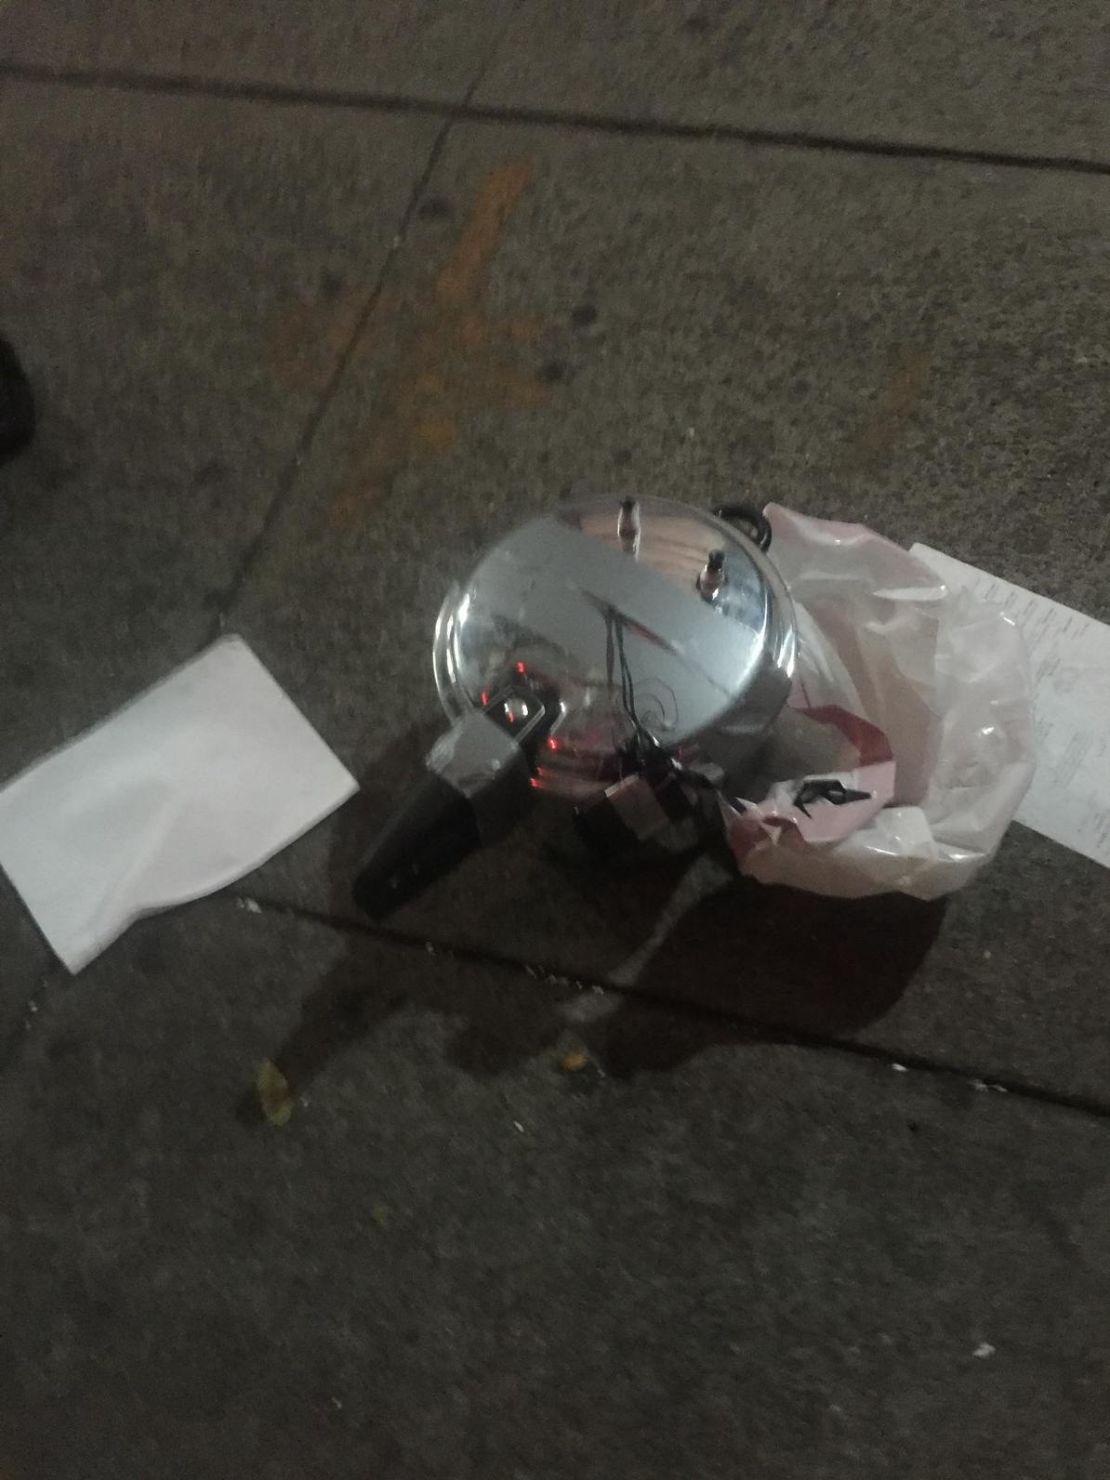 A suspicious device at a second location in Chelsea appears to be a pressure cooker with dark-colored wiring coming out of its top. 